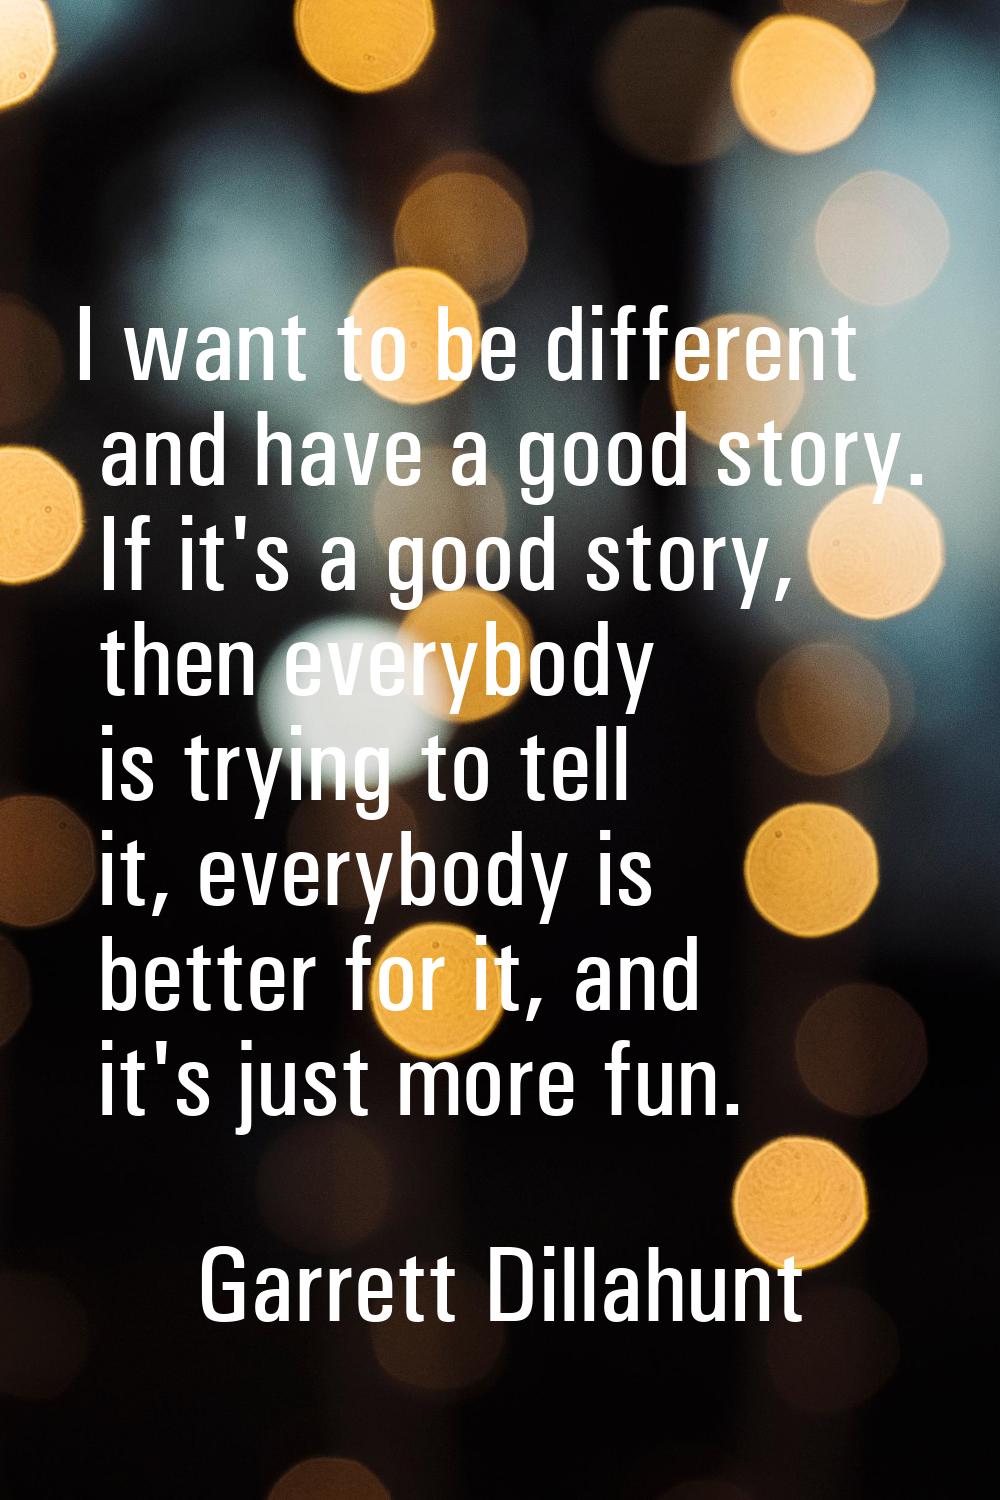 I want to be different and have a good story. If it's a good story, then everybody is trying to tel